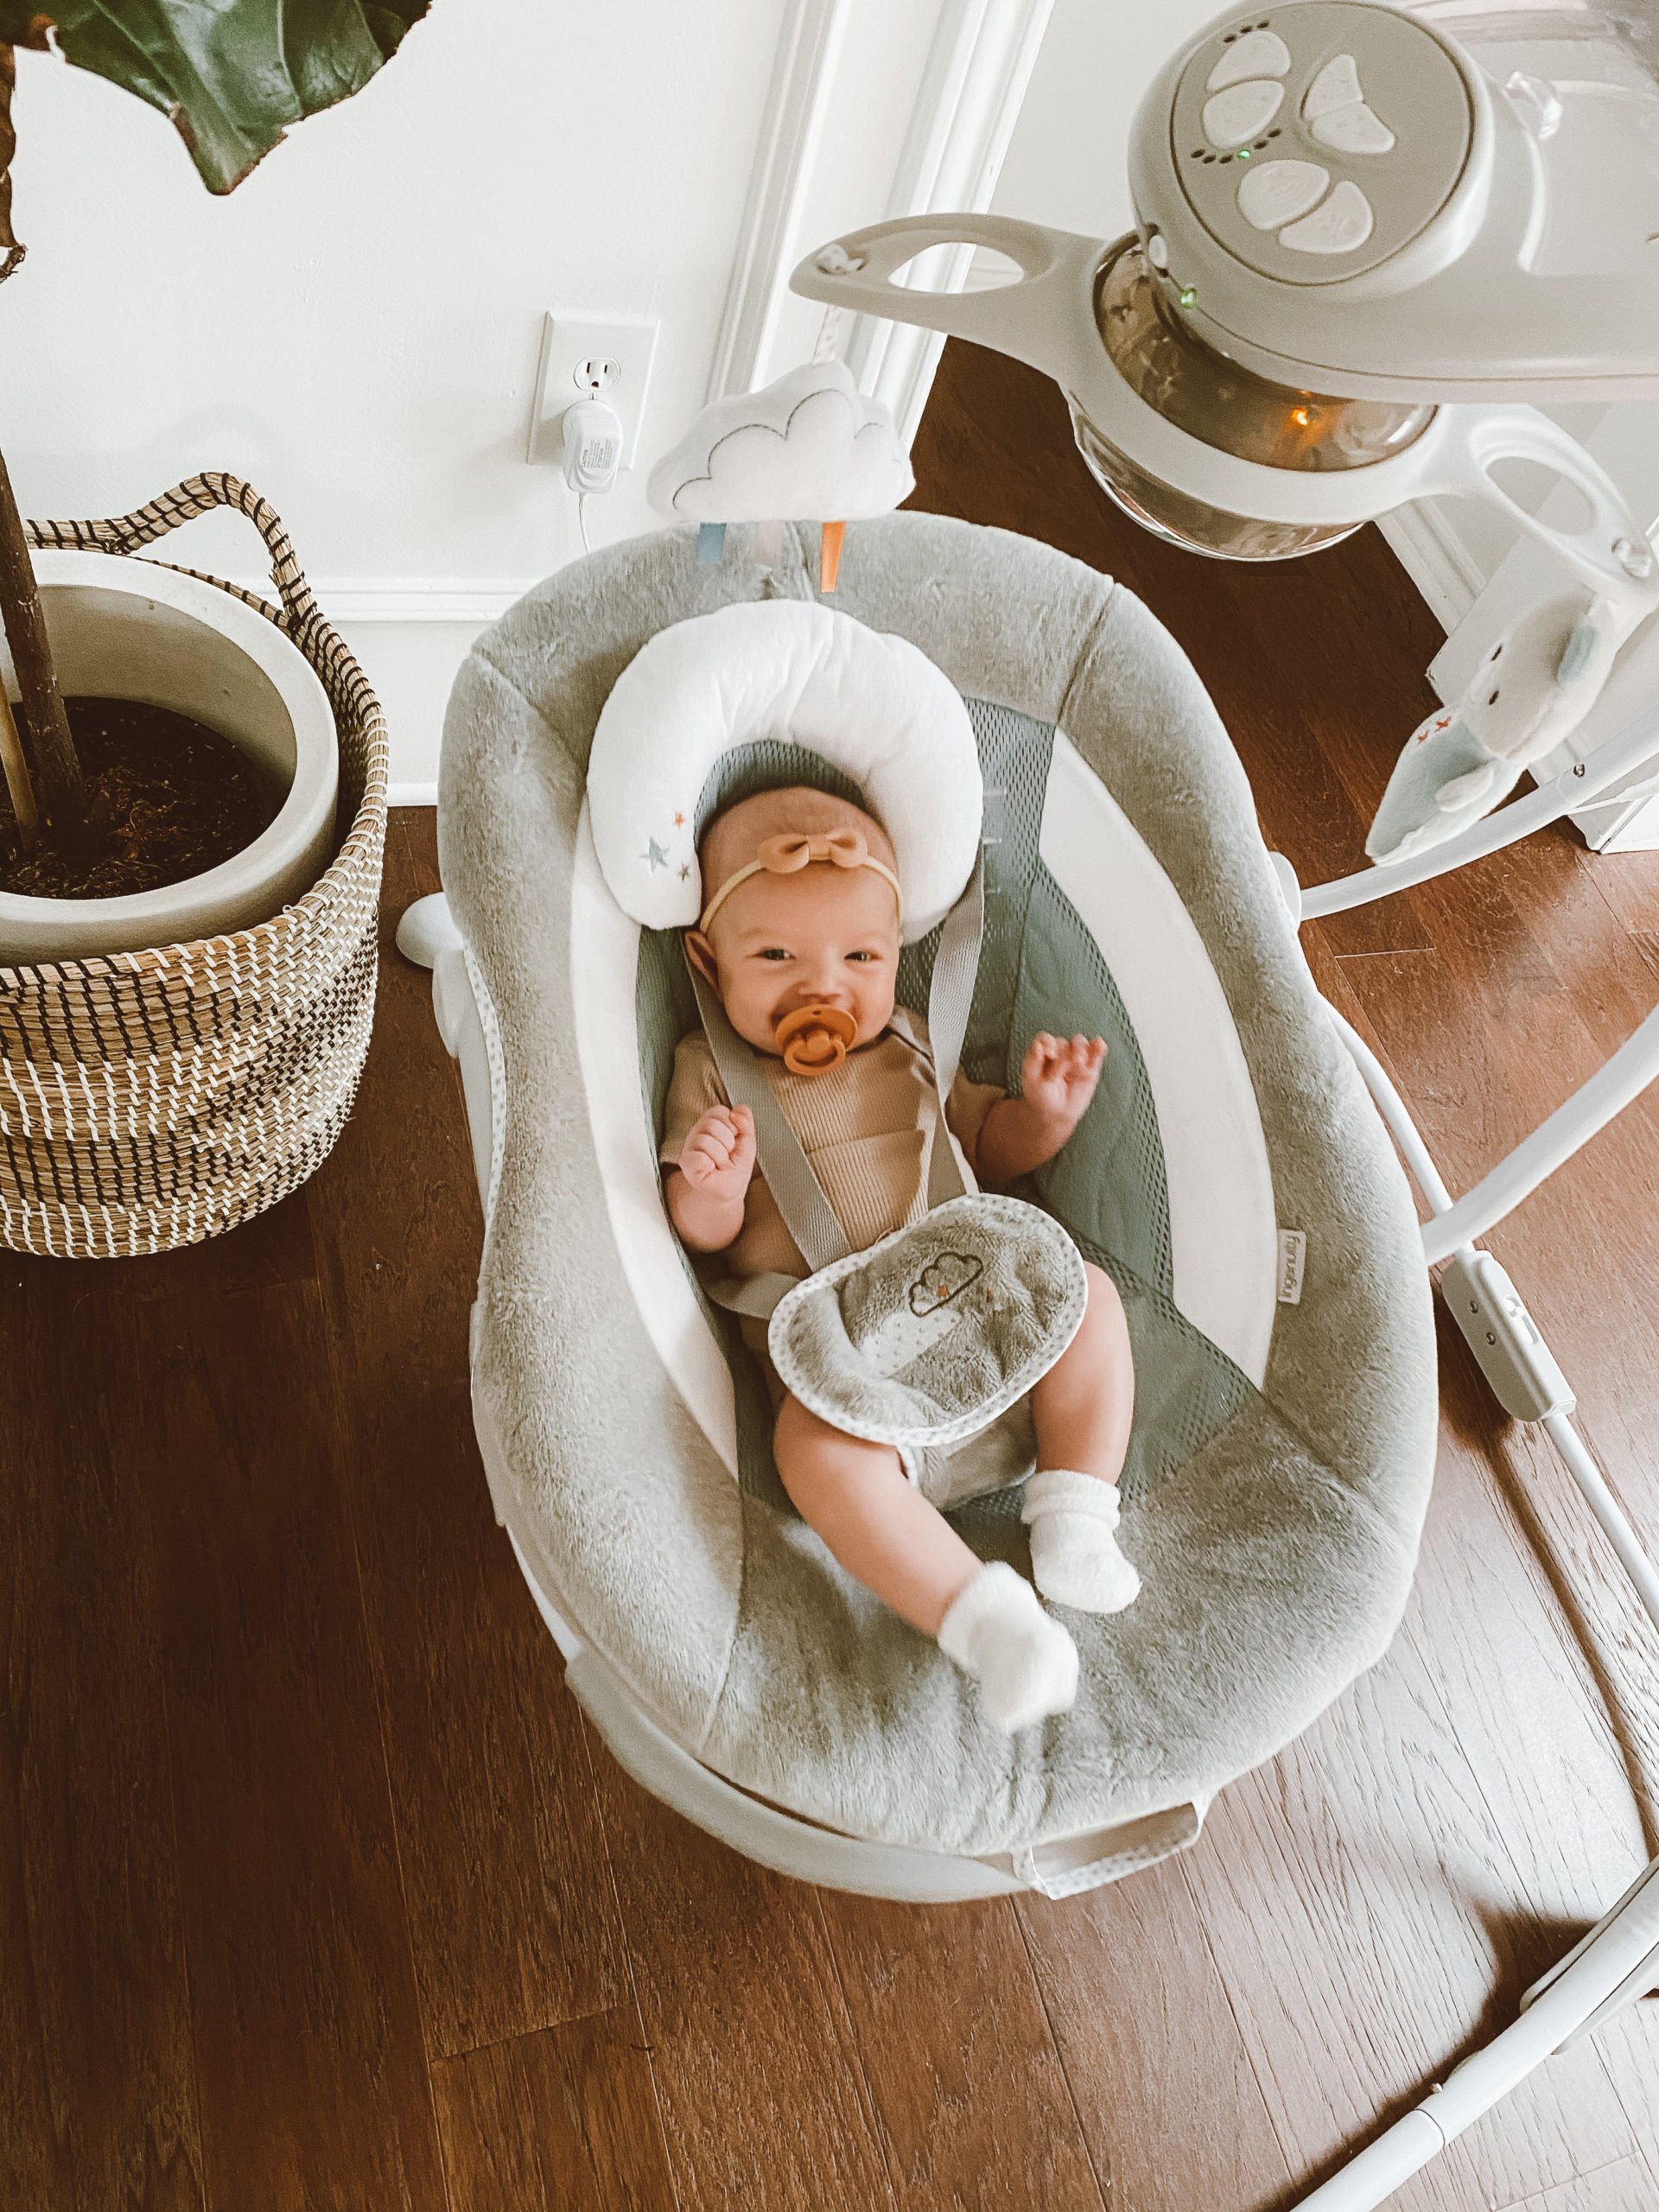 baby swing vs mamaRoo review and comparison